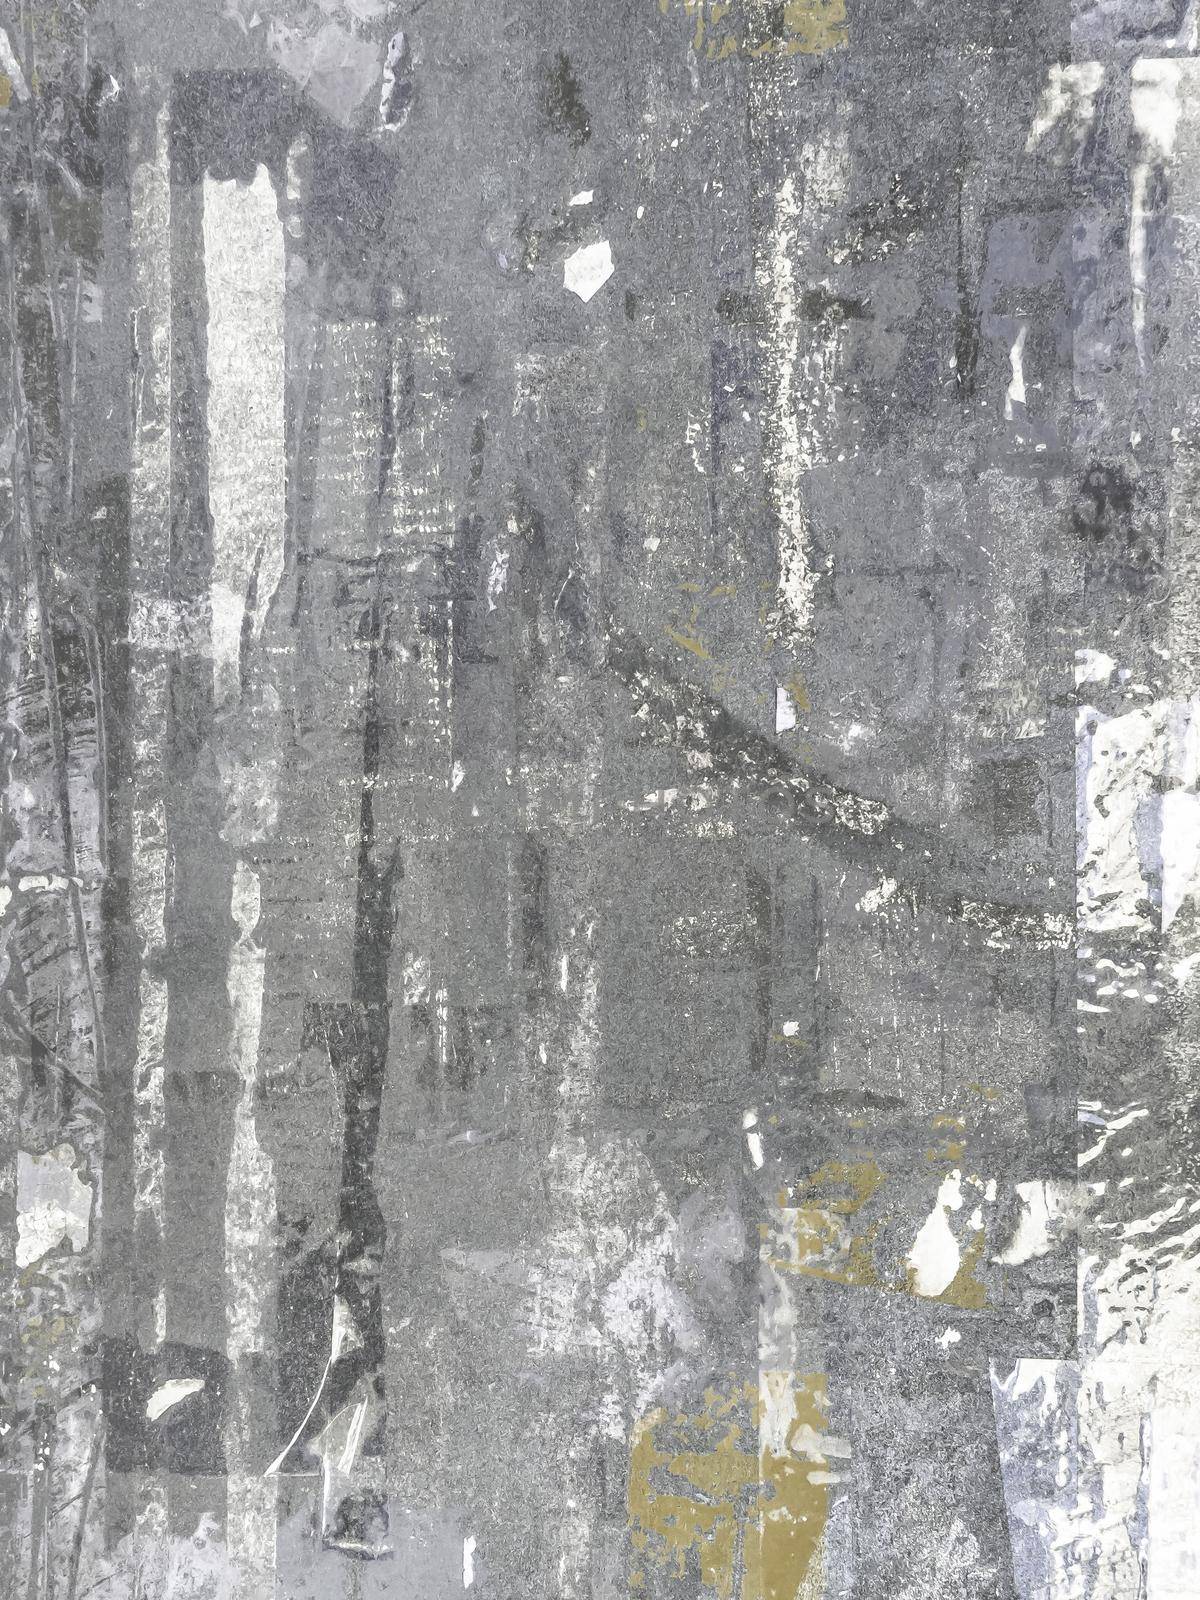 Ripped paper background. Grunge backdrop. Worn abandoned urban street poster detail. Grunge texture. Ideal for concepts and backgrounds.